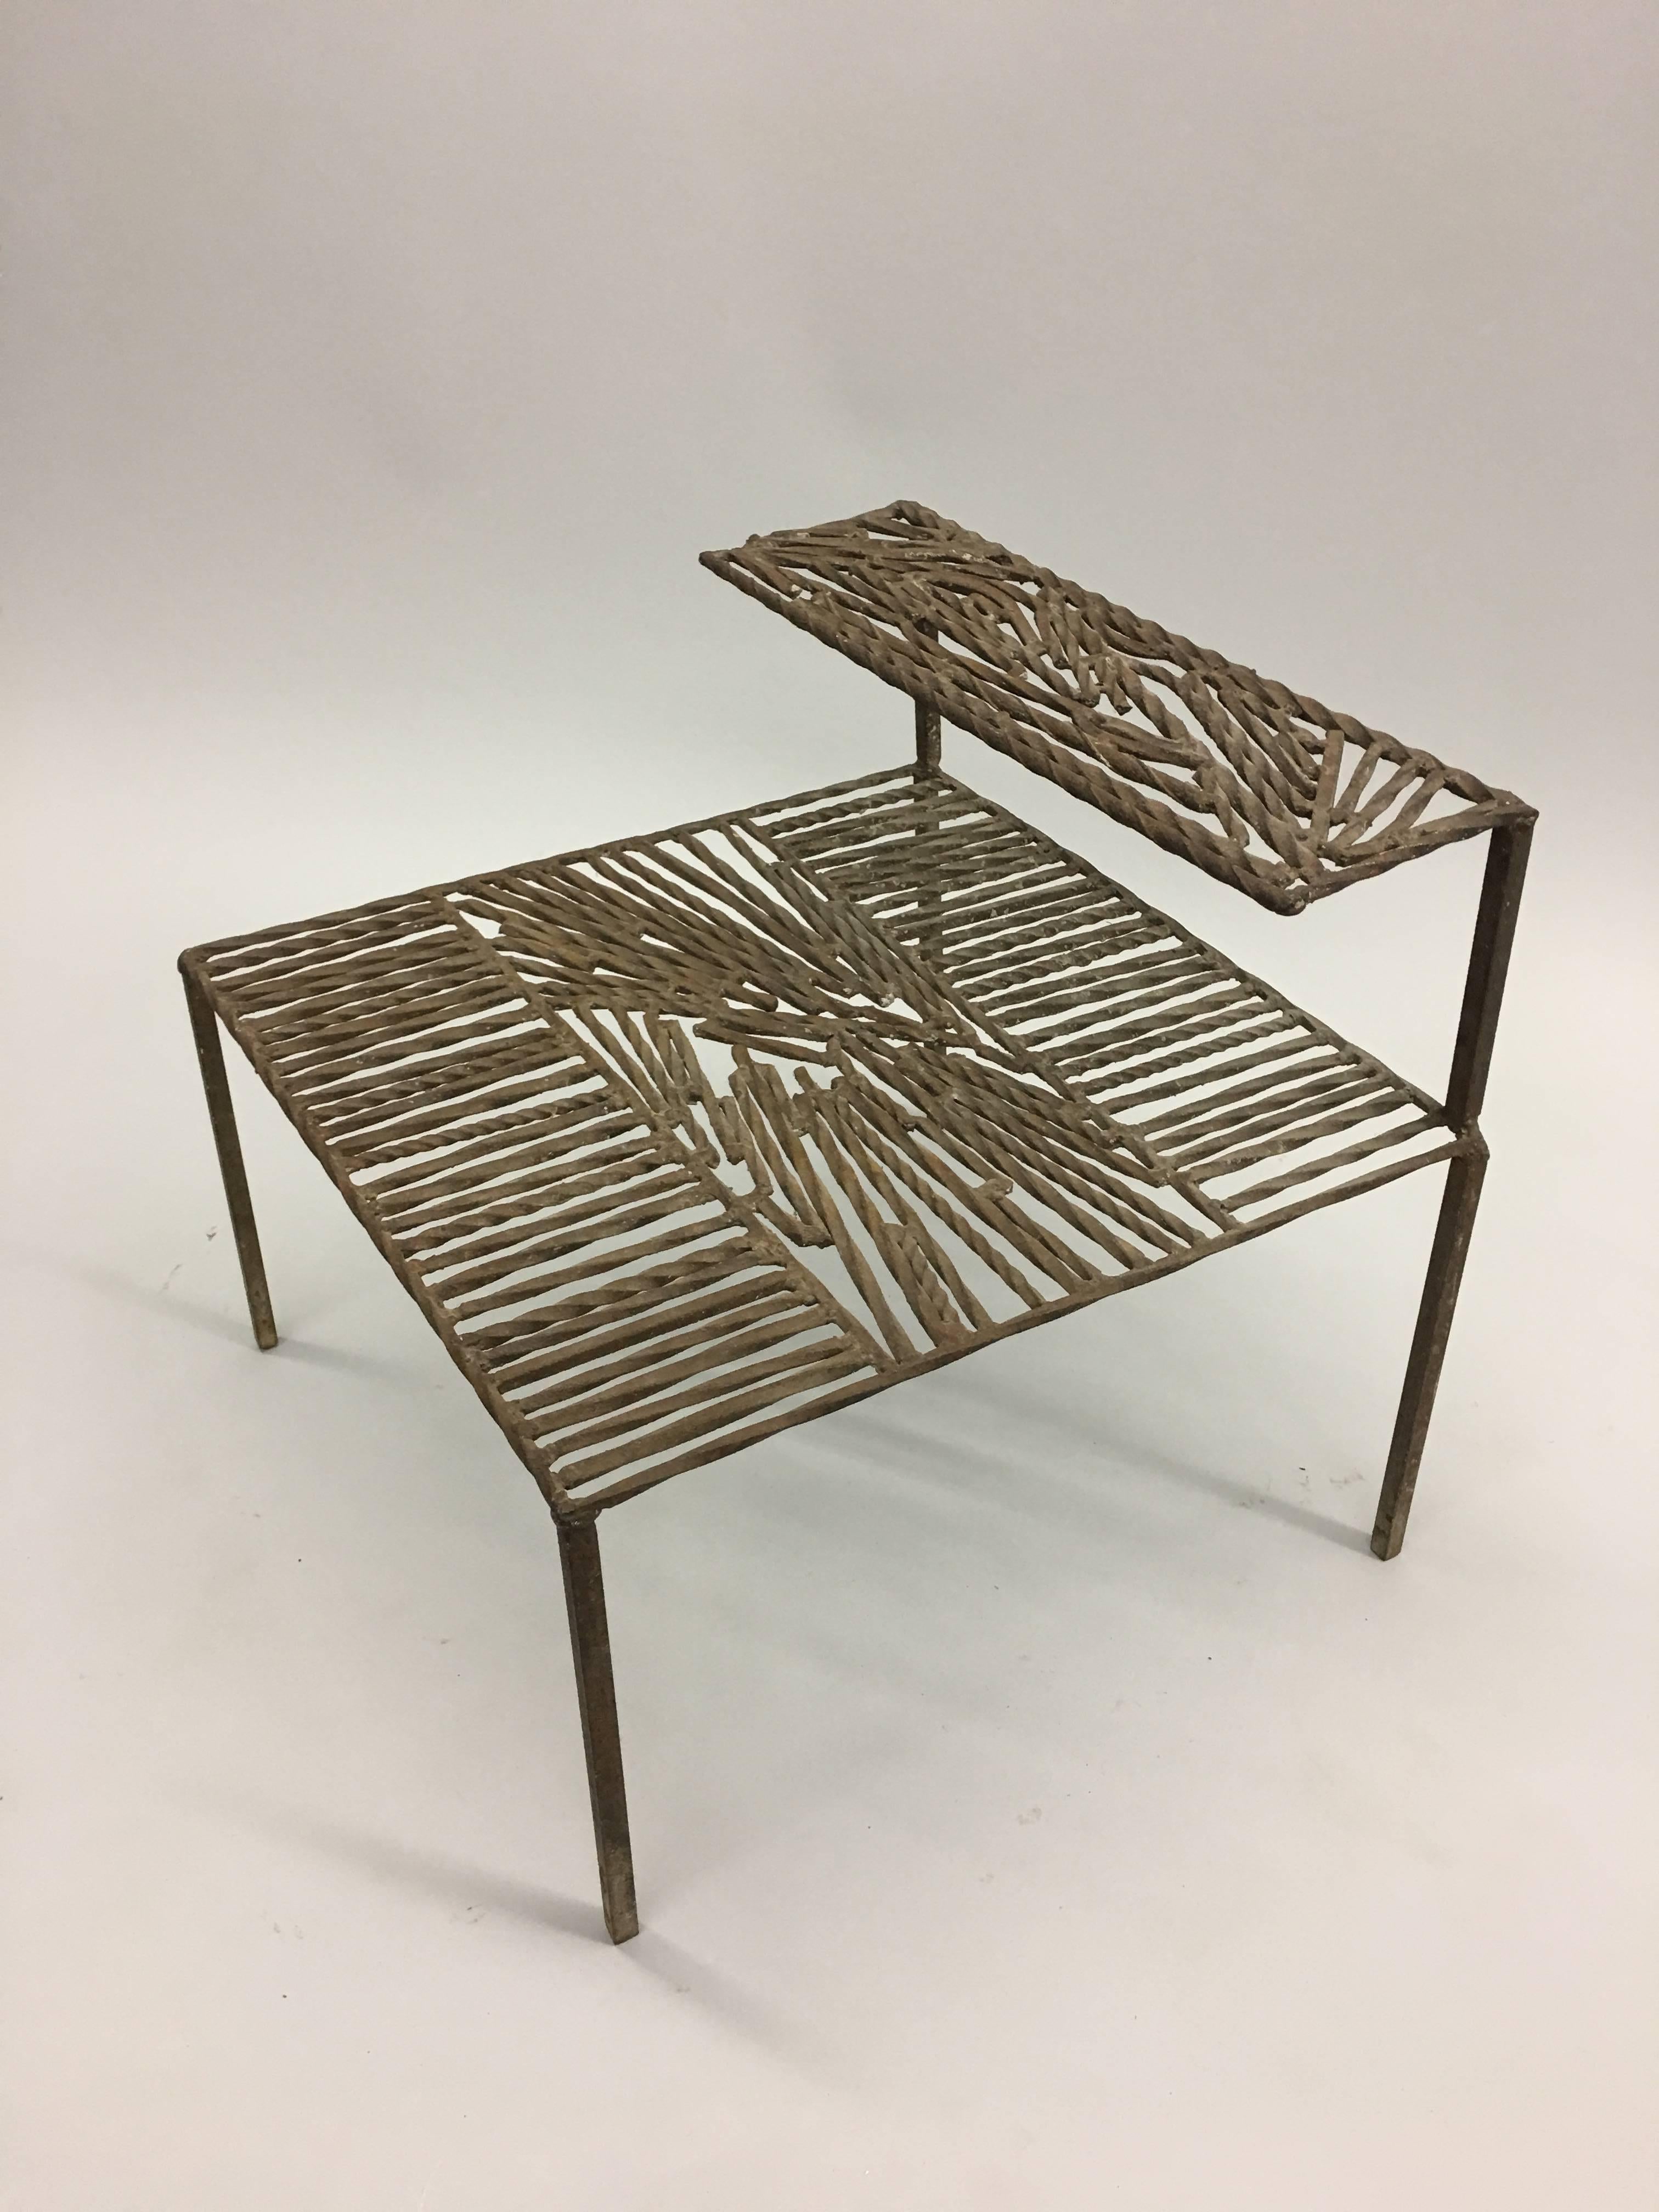 Wrought iron sculpture constructed in the form a double level table
Italy, circa 1967

The top of each level is constructed as an Arte Povera / Post-Minimalist sculpture with parallel rods of iron being intercepted by diagonal